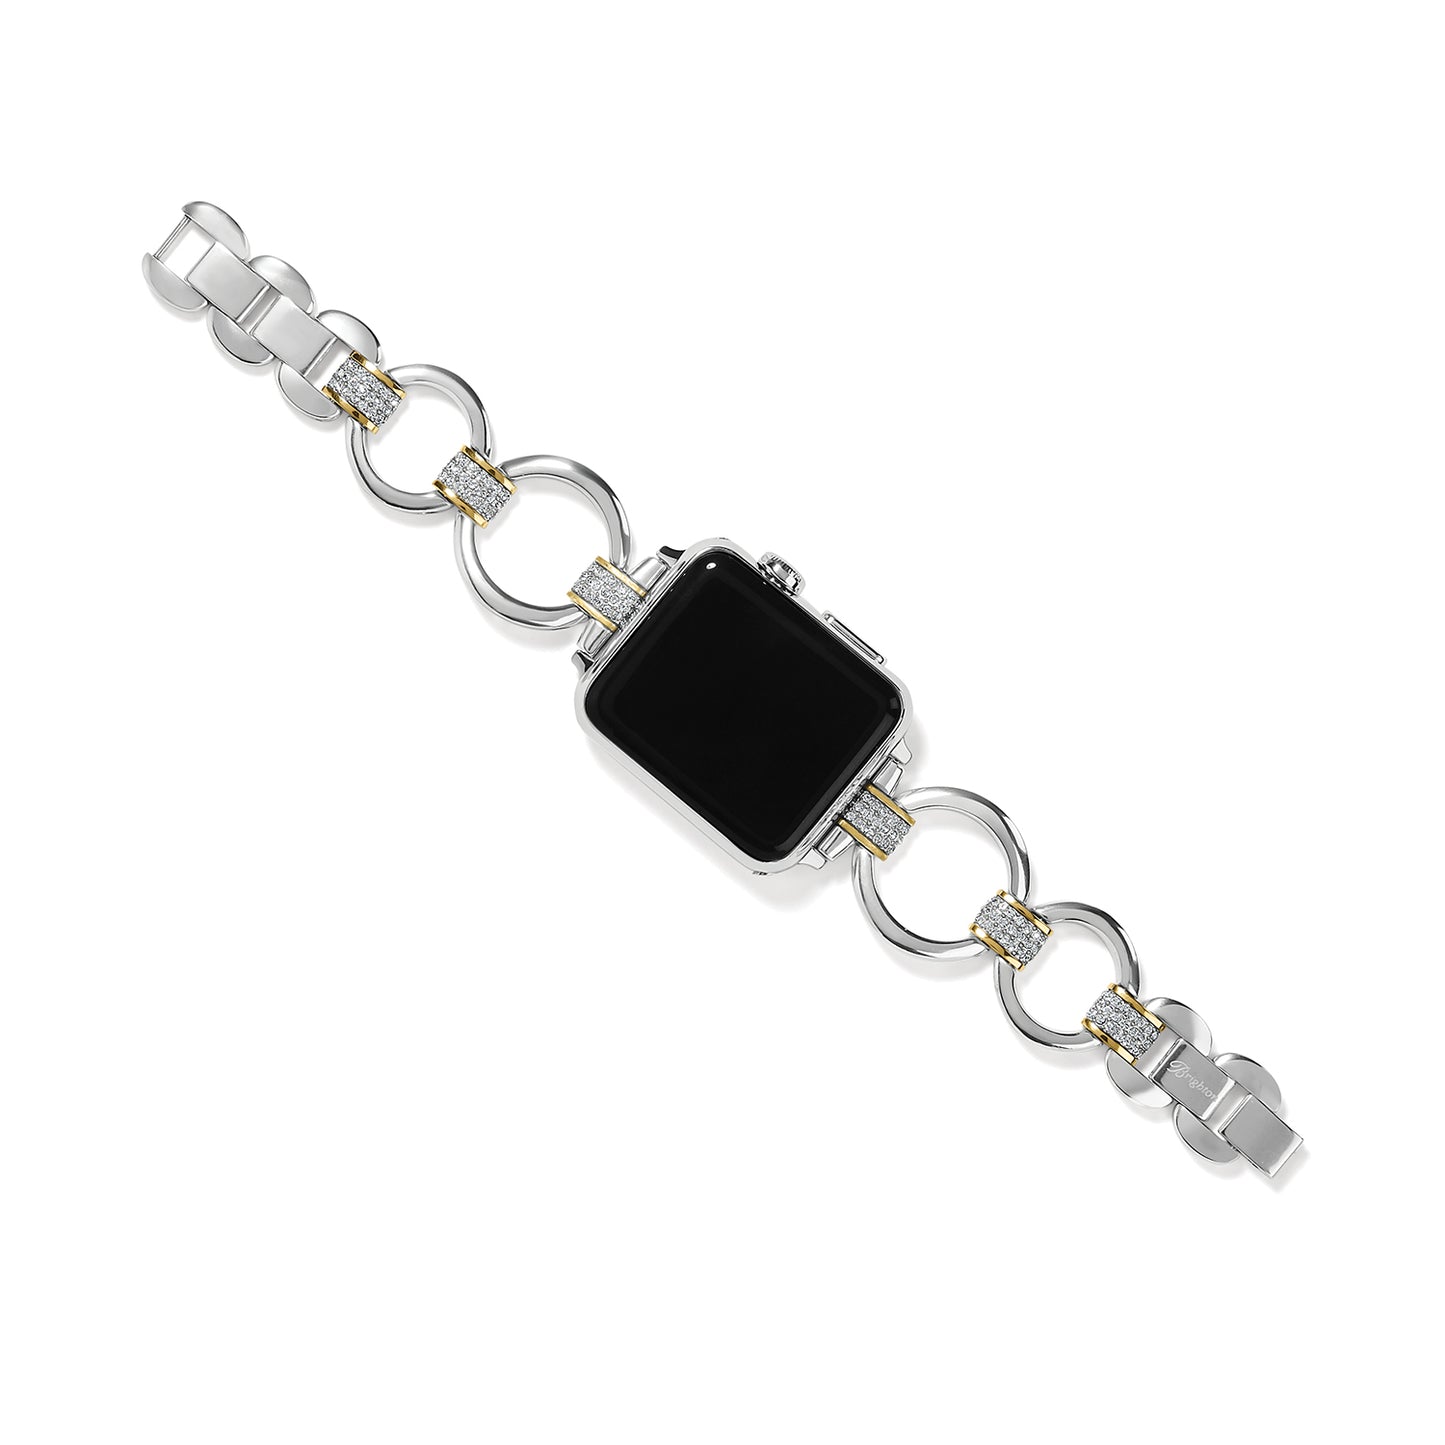 Meridian Tempo Apple Watch Band